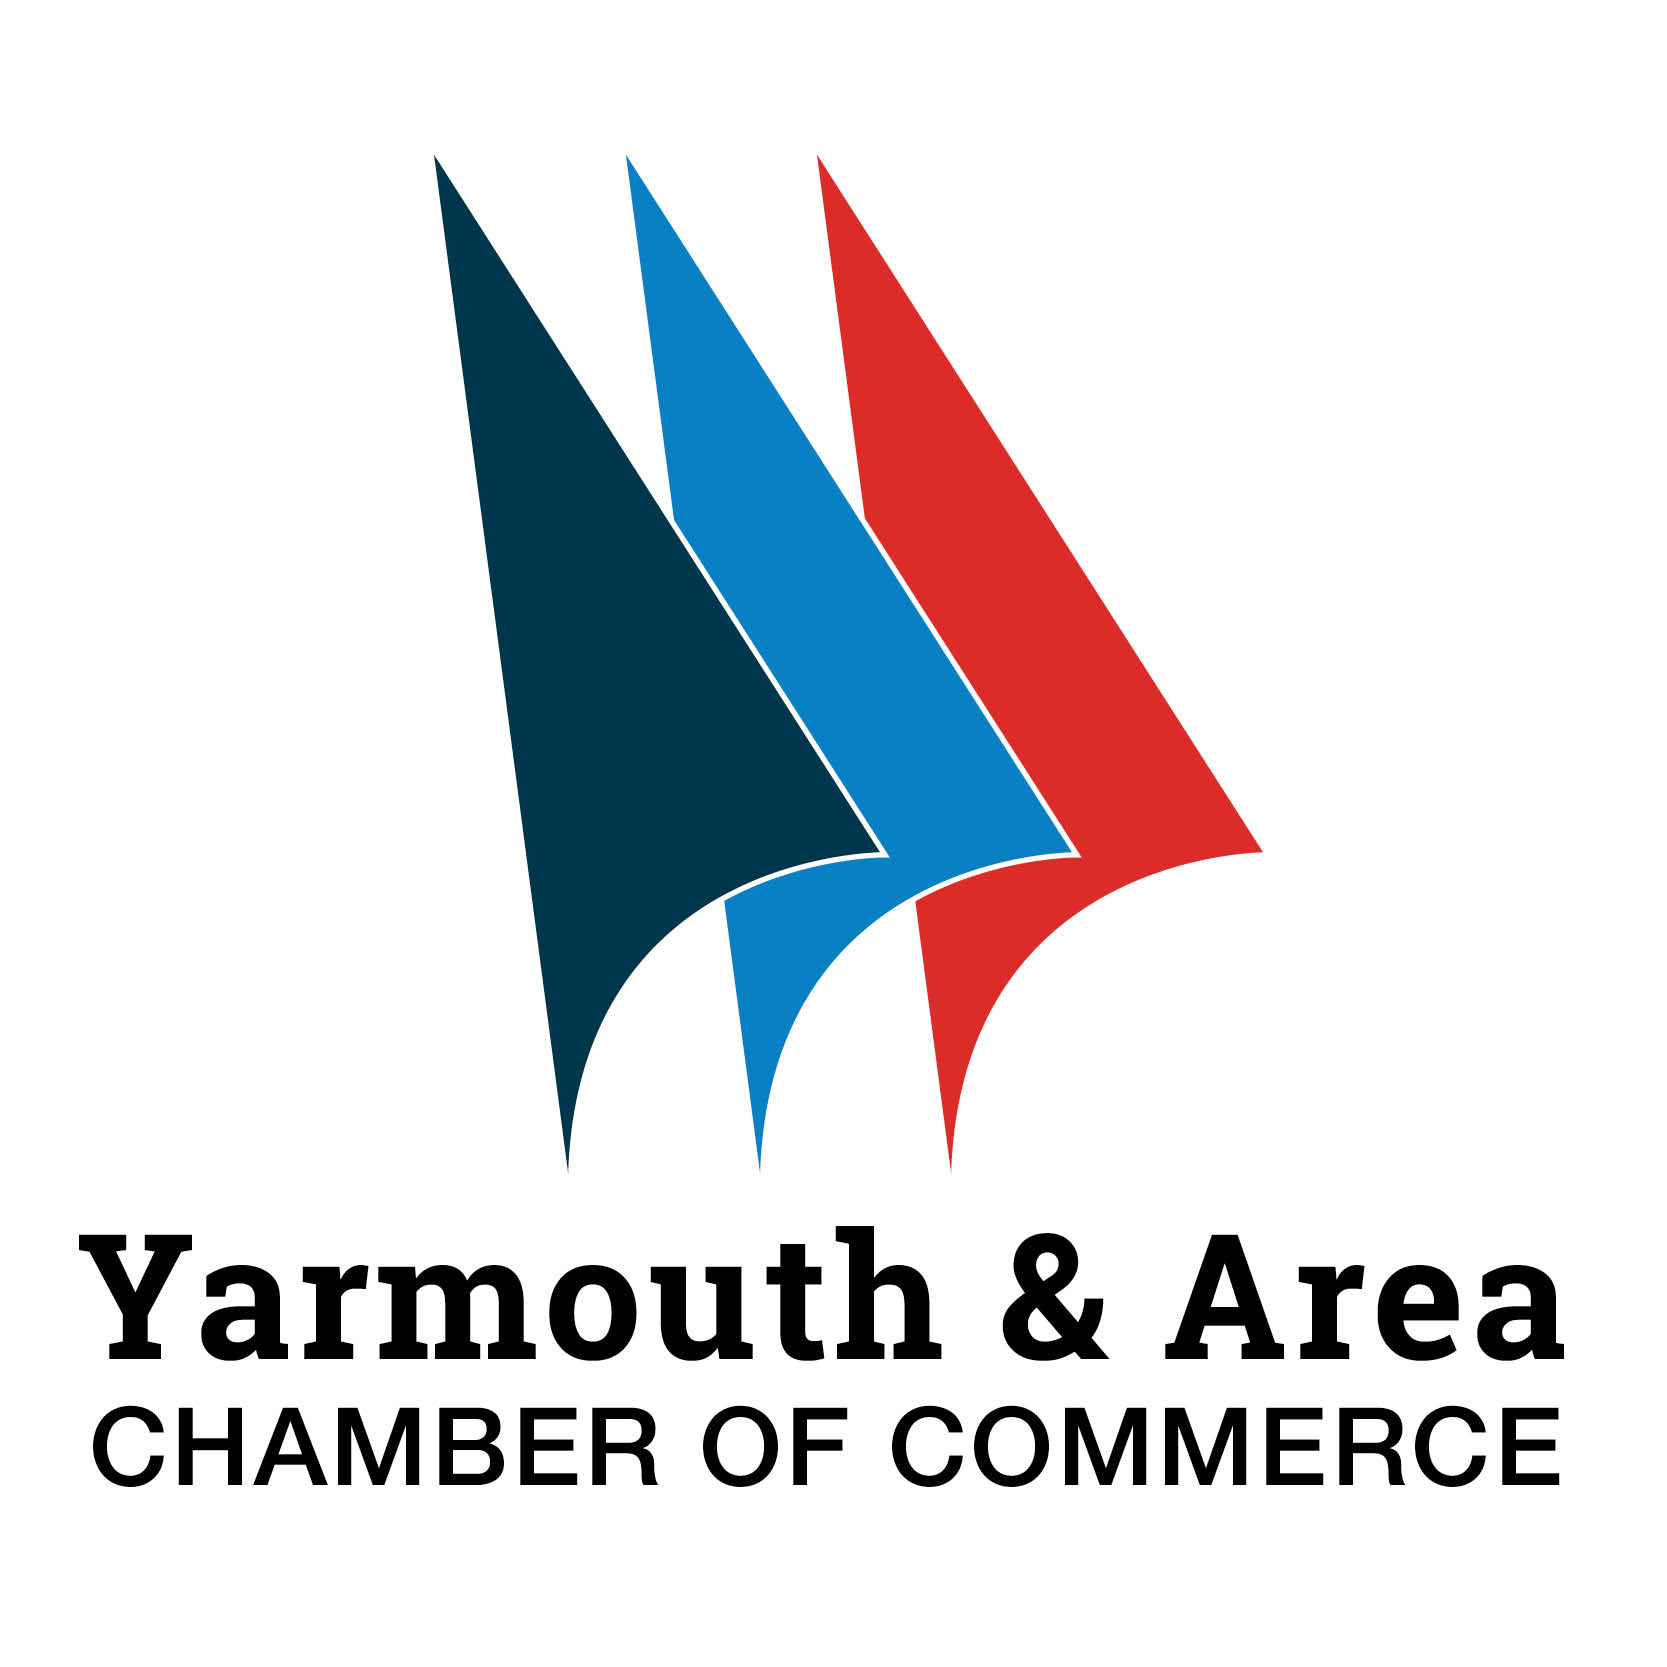 Yarmouth chamber of commerce